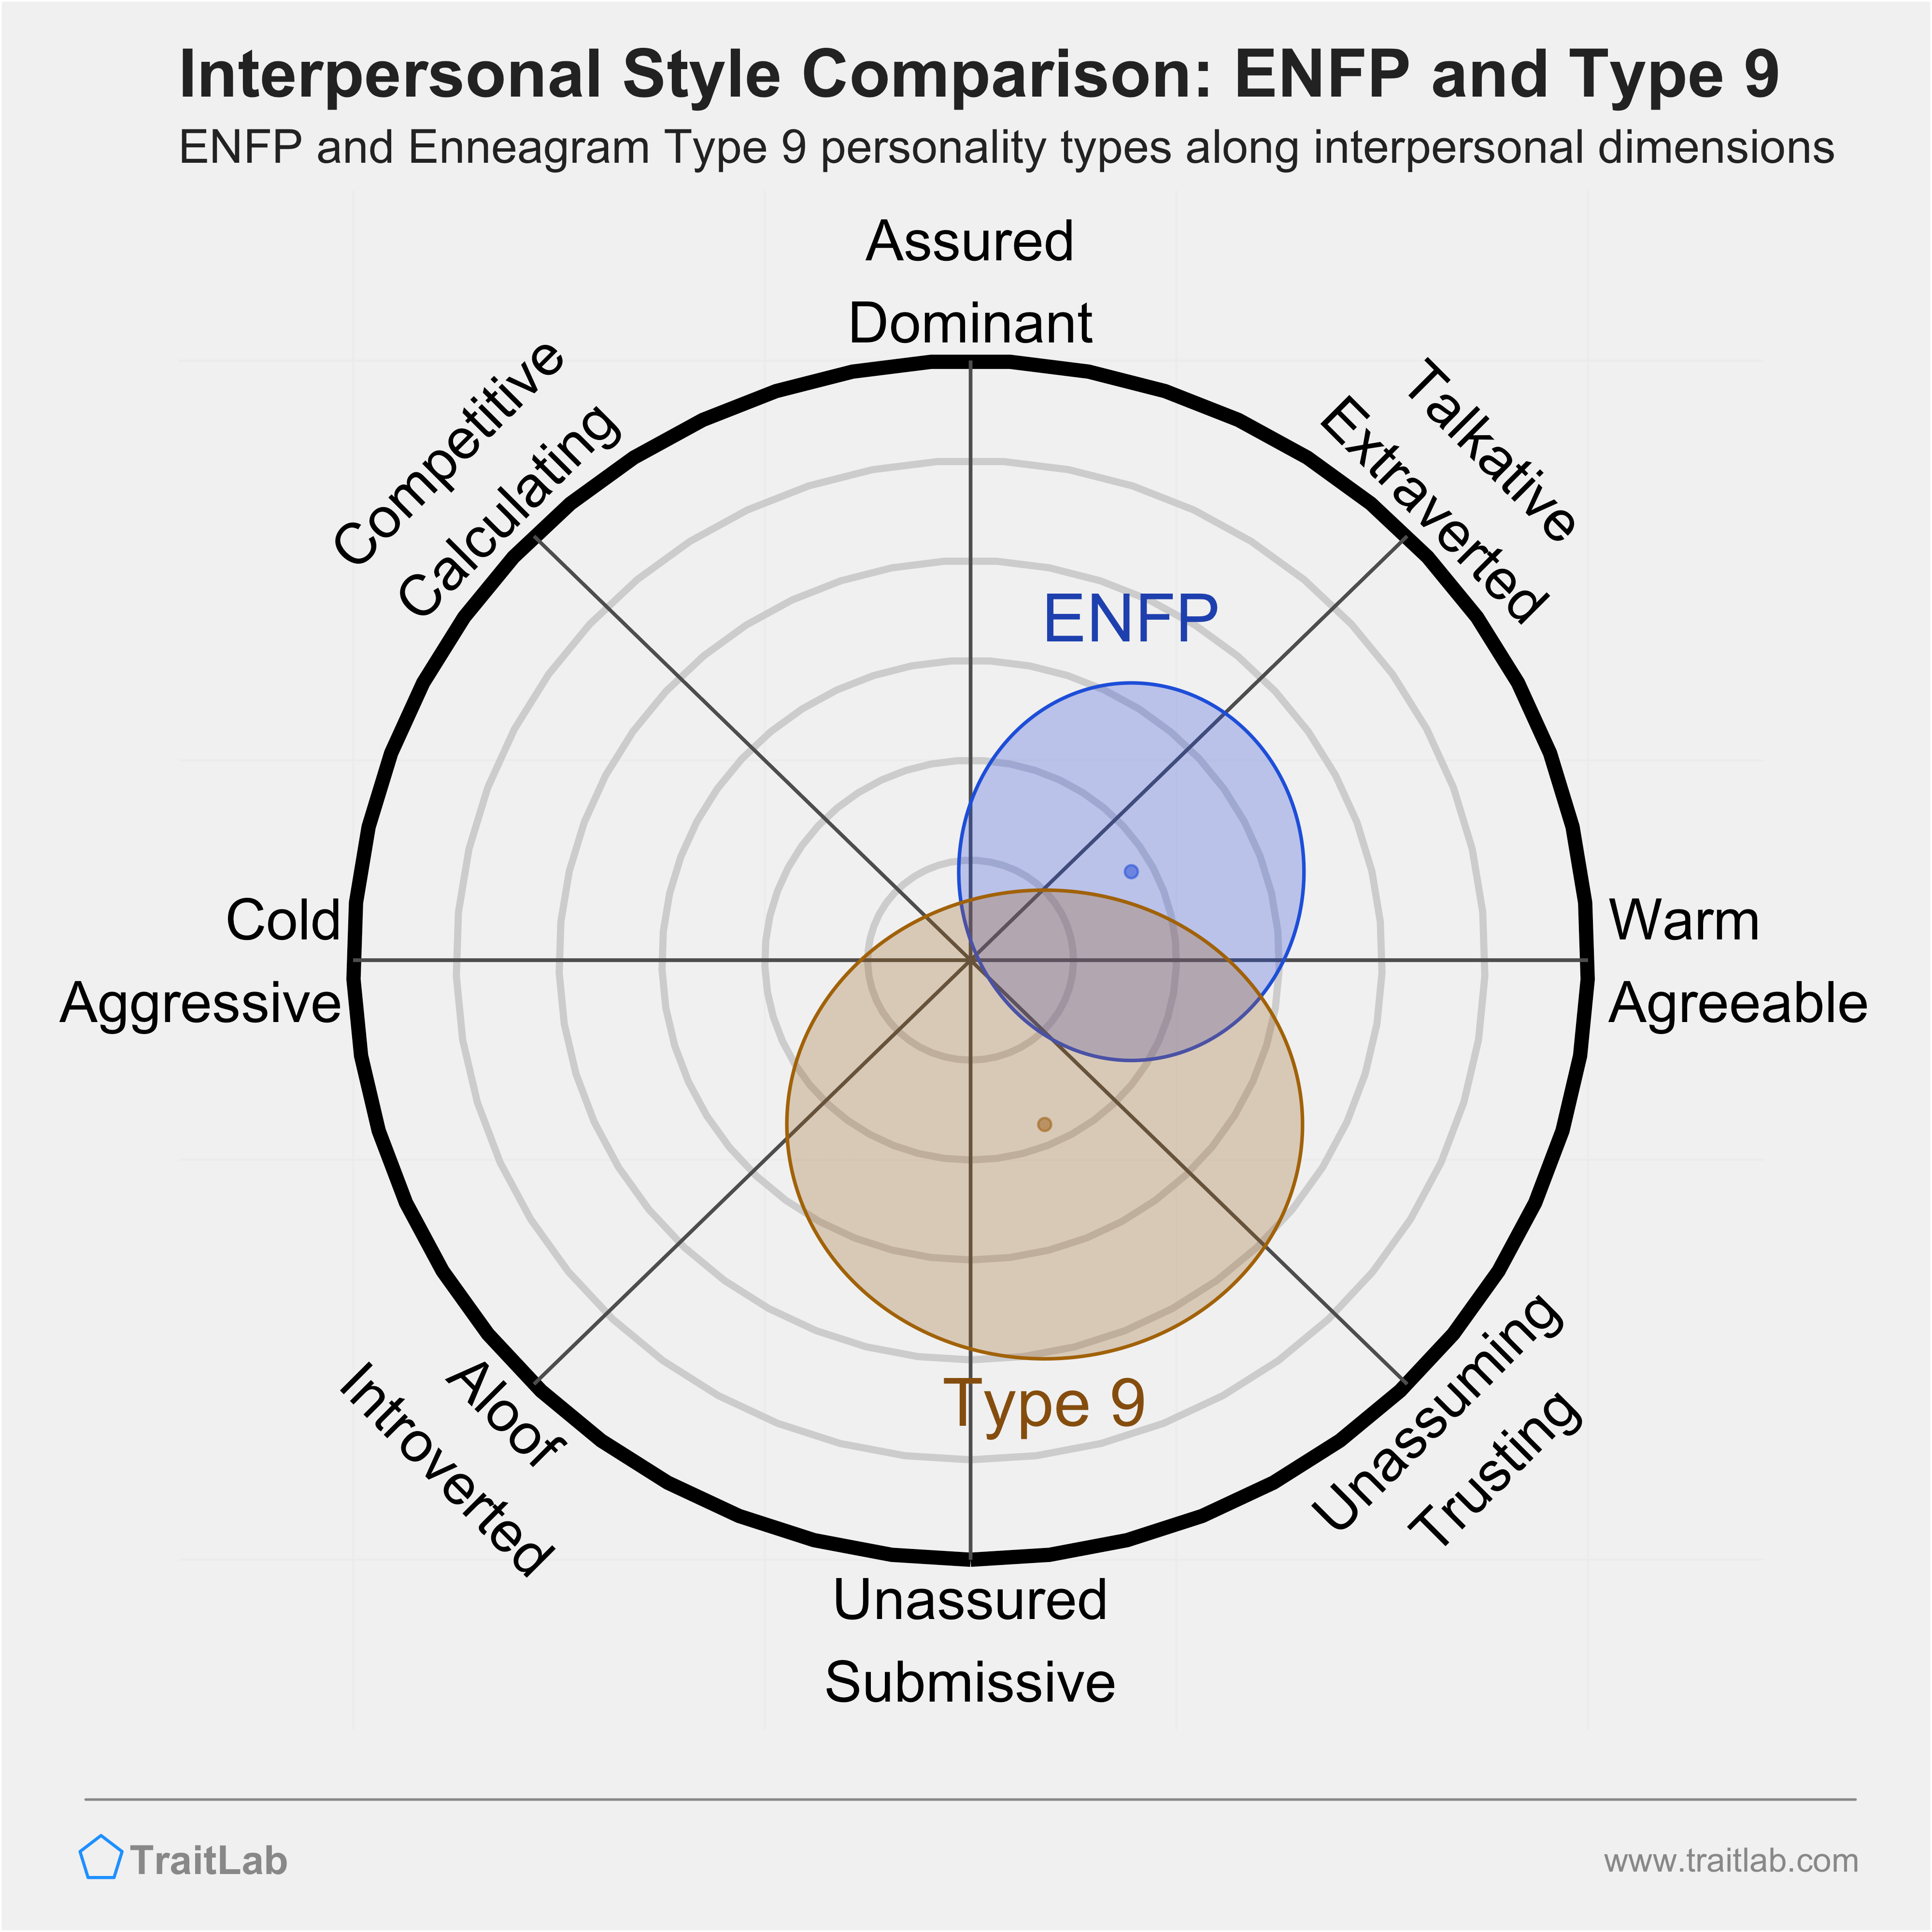 Enneagram ENFP and Type 9 comparison across interpersonal dimensions